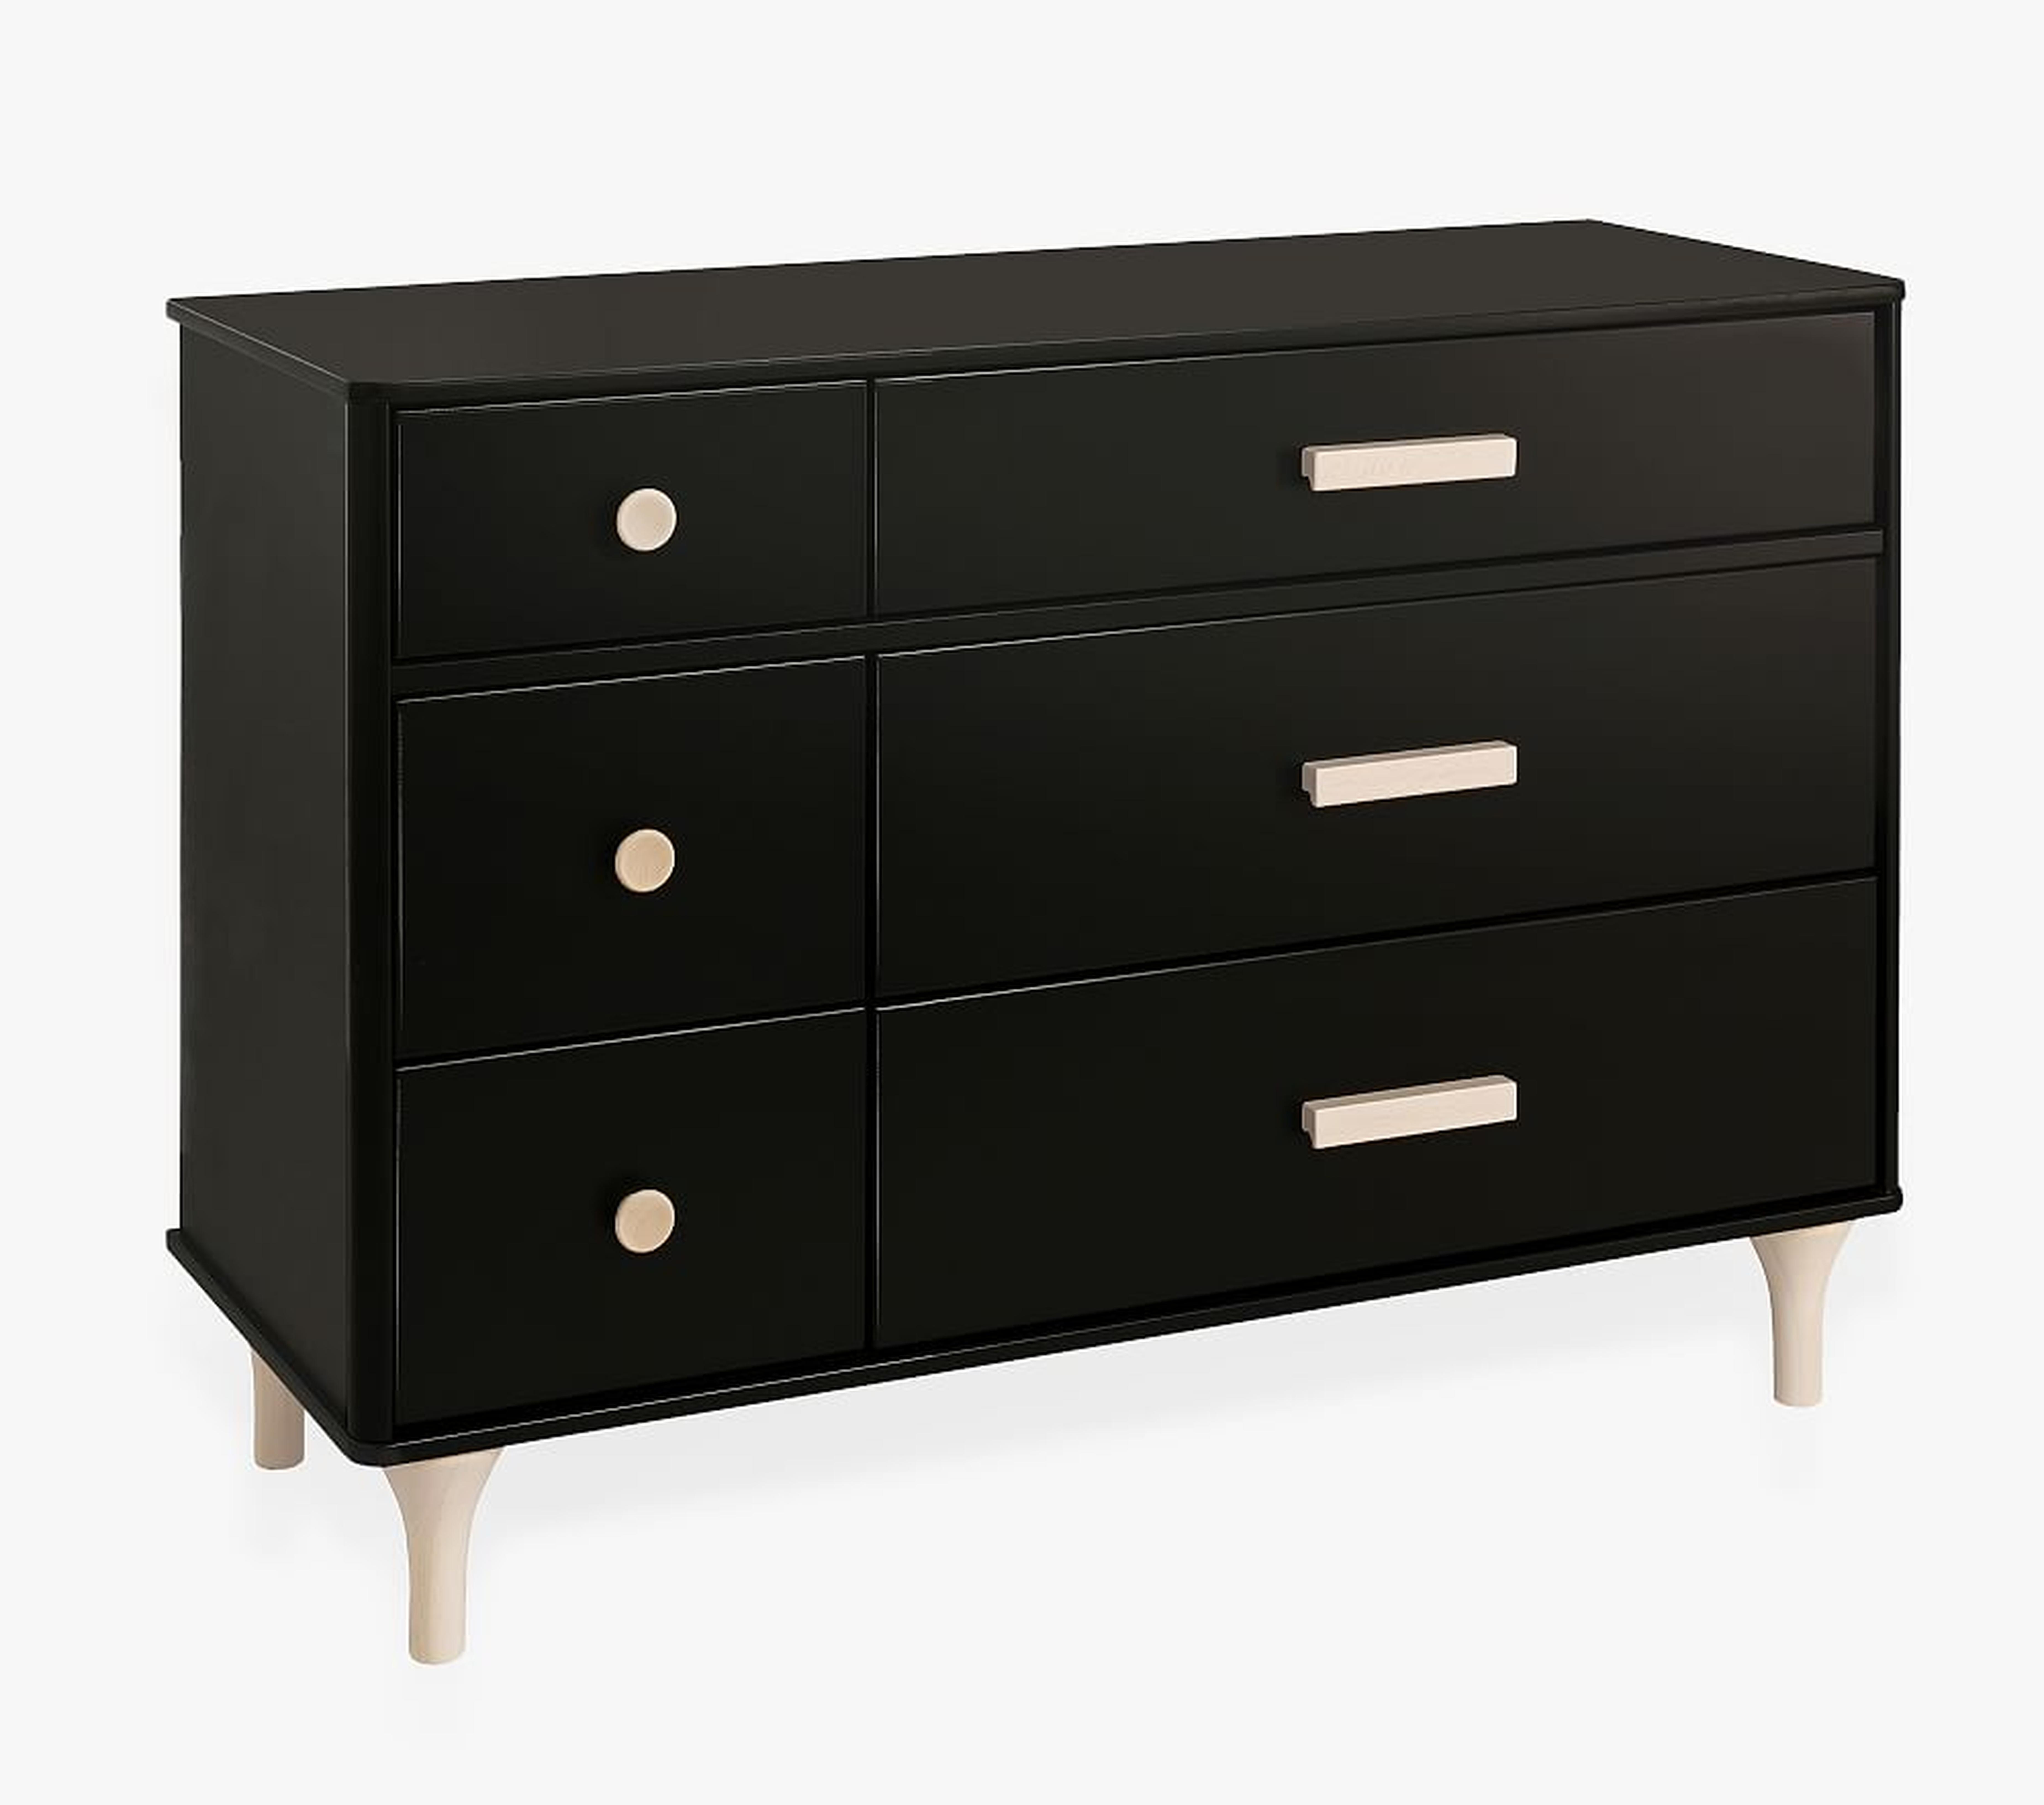 Babyletto Lolly 6 Drawer Dresser, Black/Washed Natural - Pottery Barn Kids